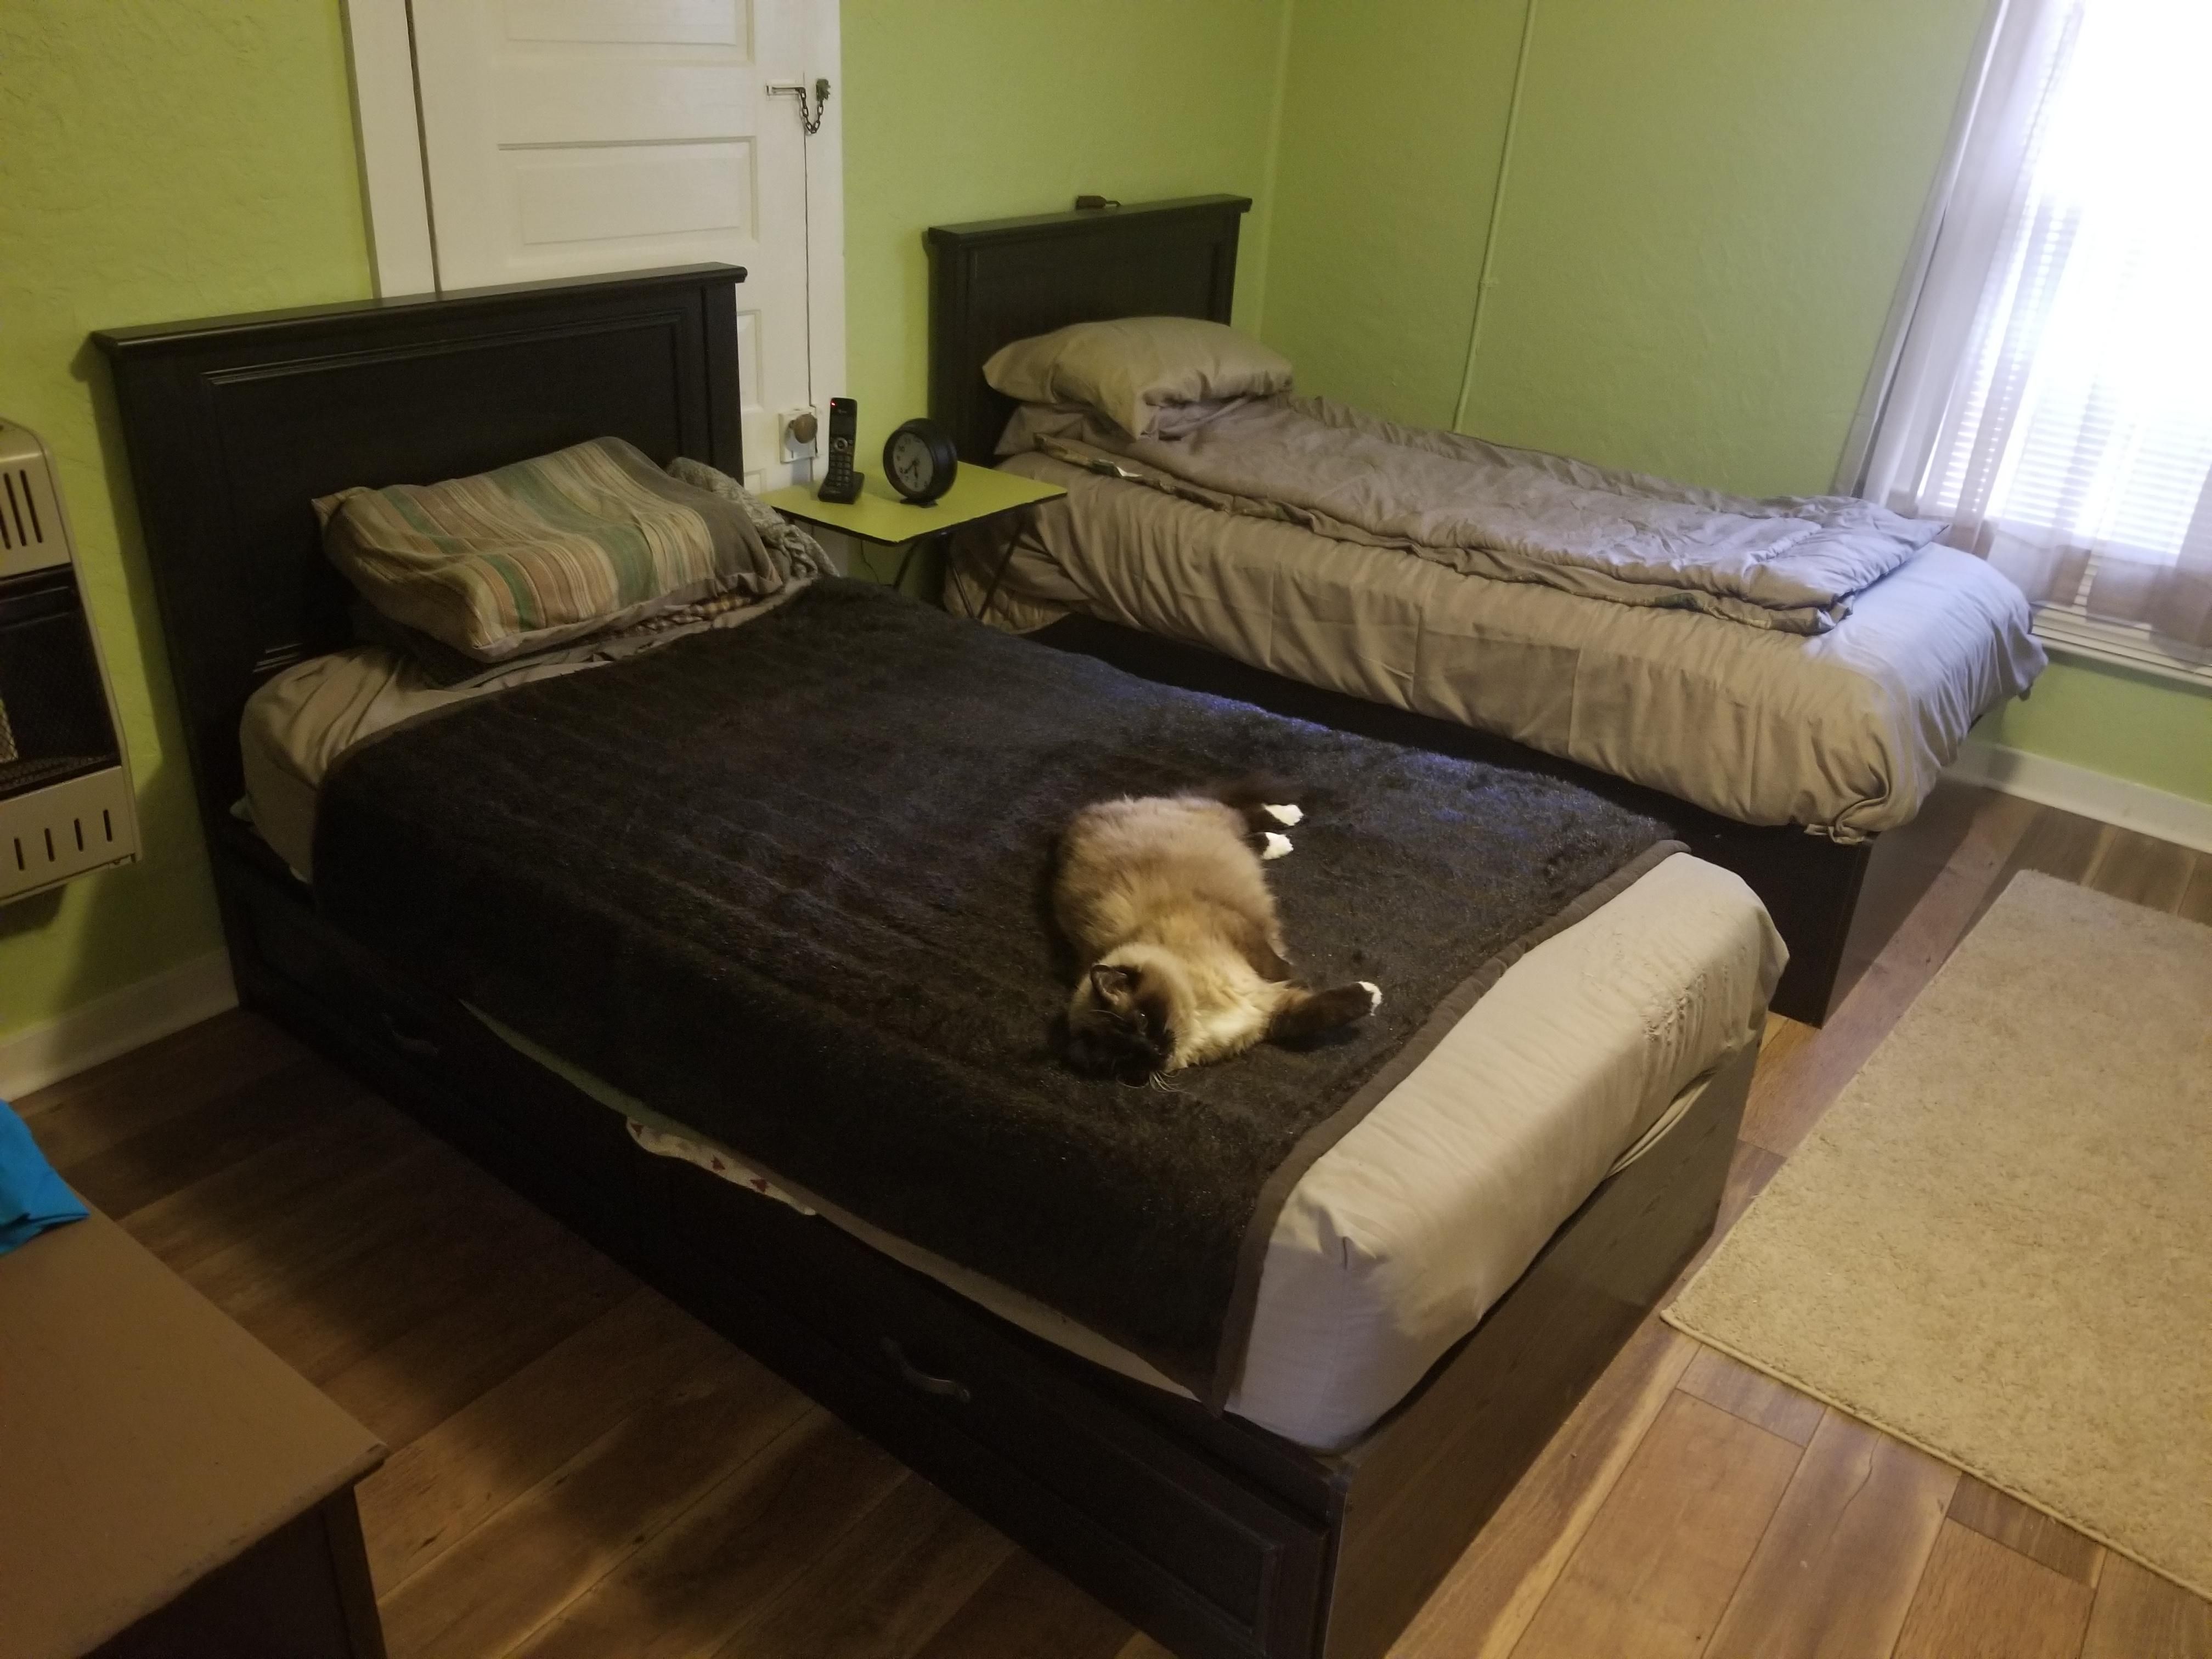 My grandmother bought a whole extra bed just for her cat.